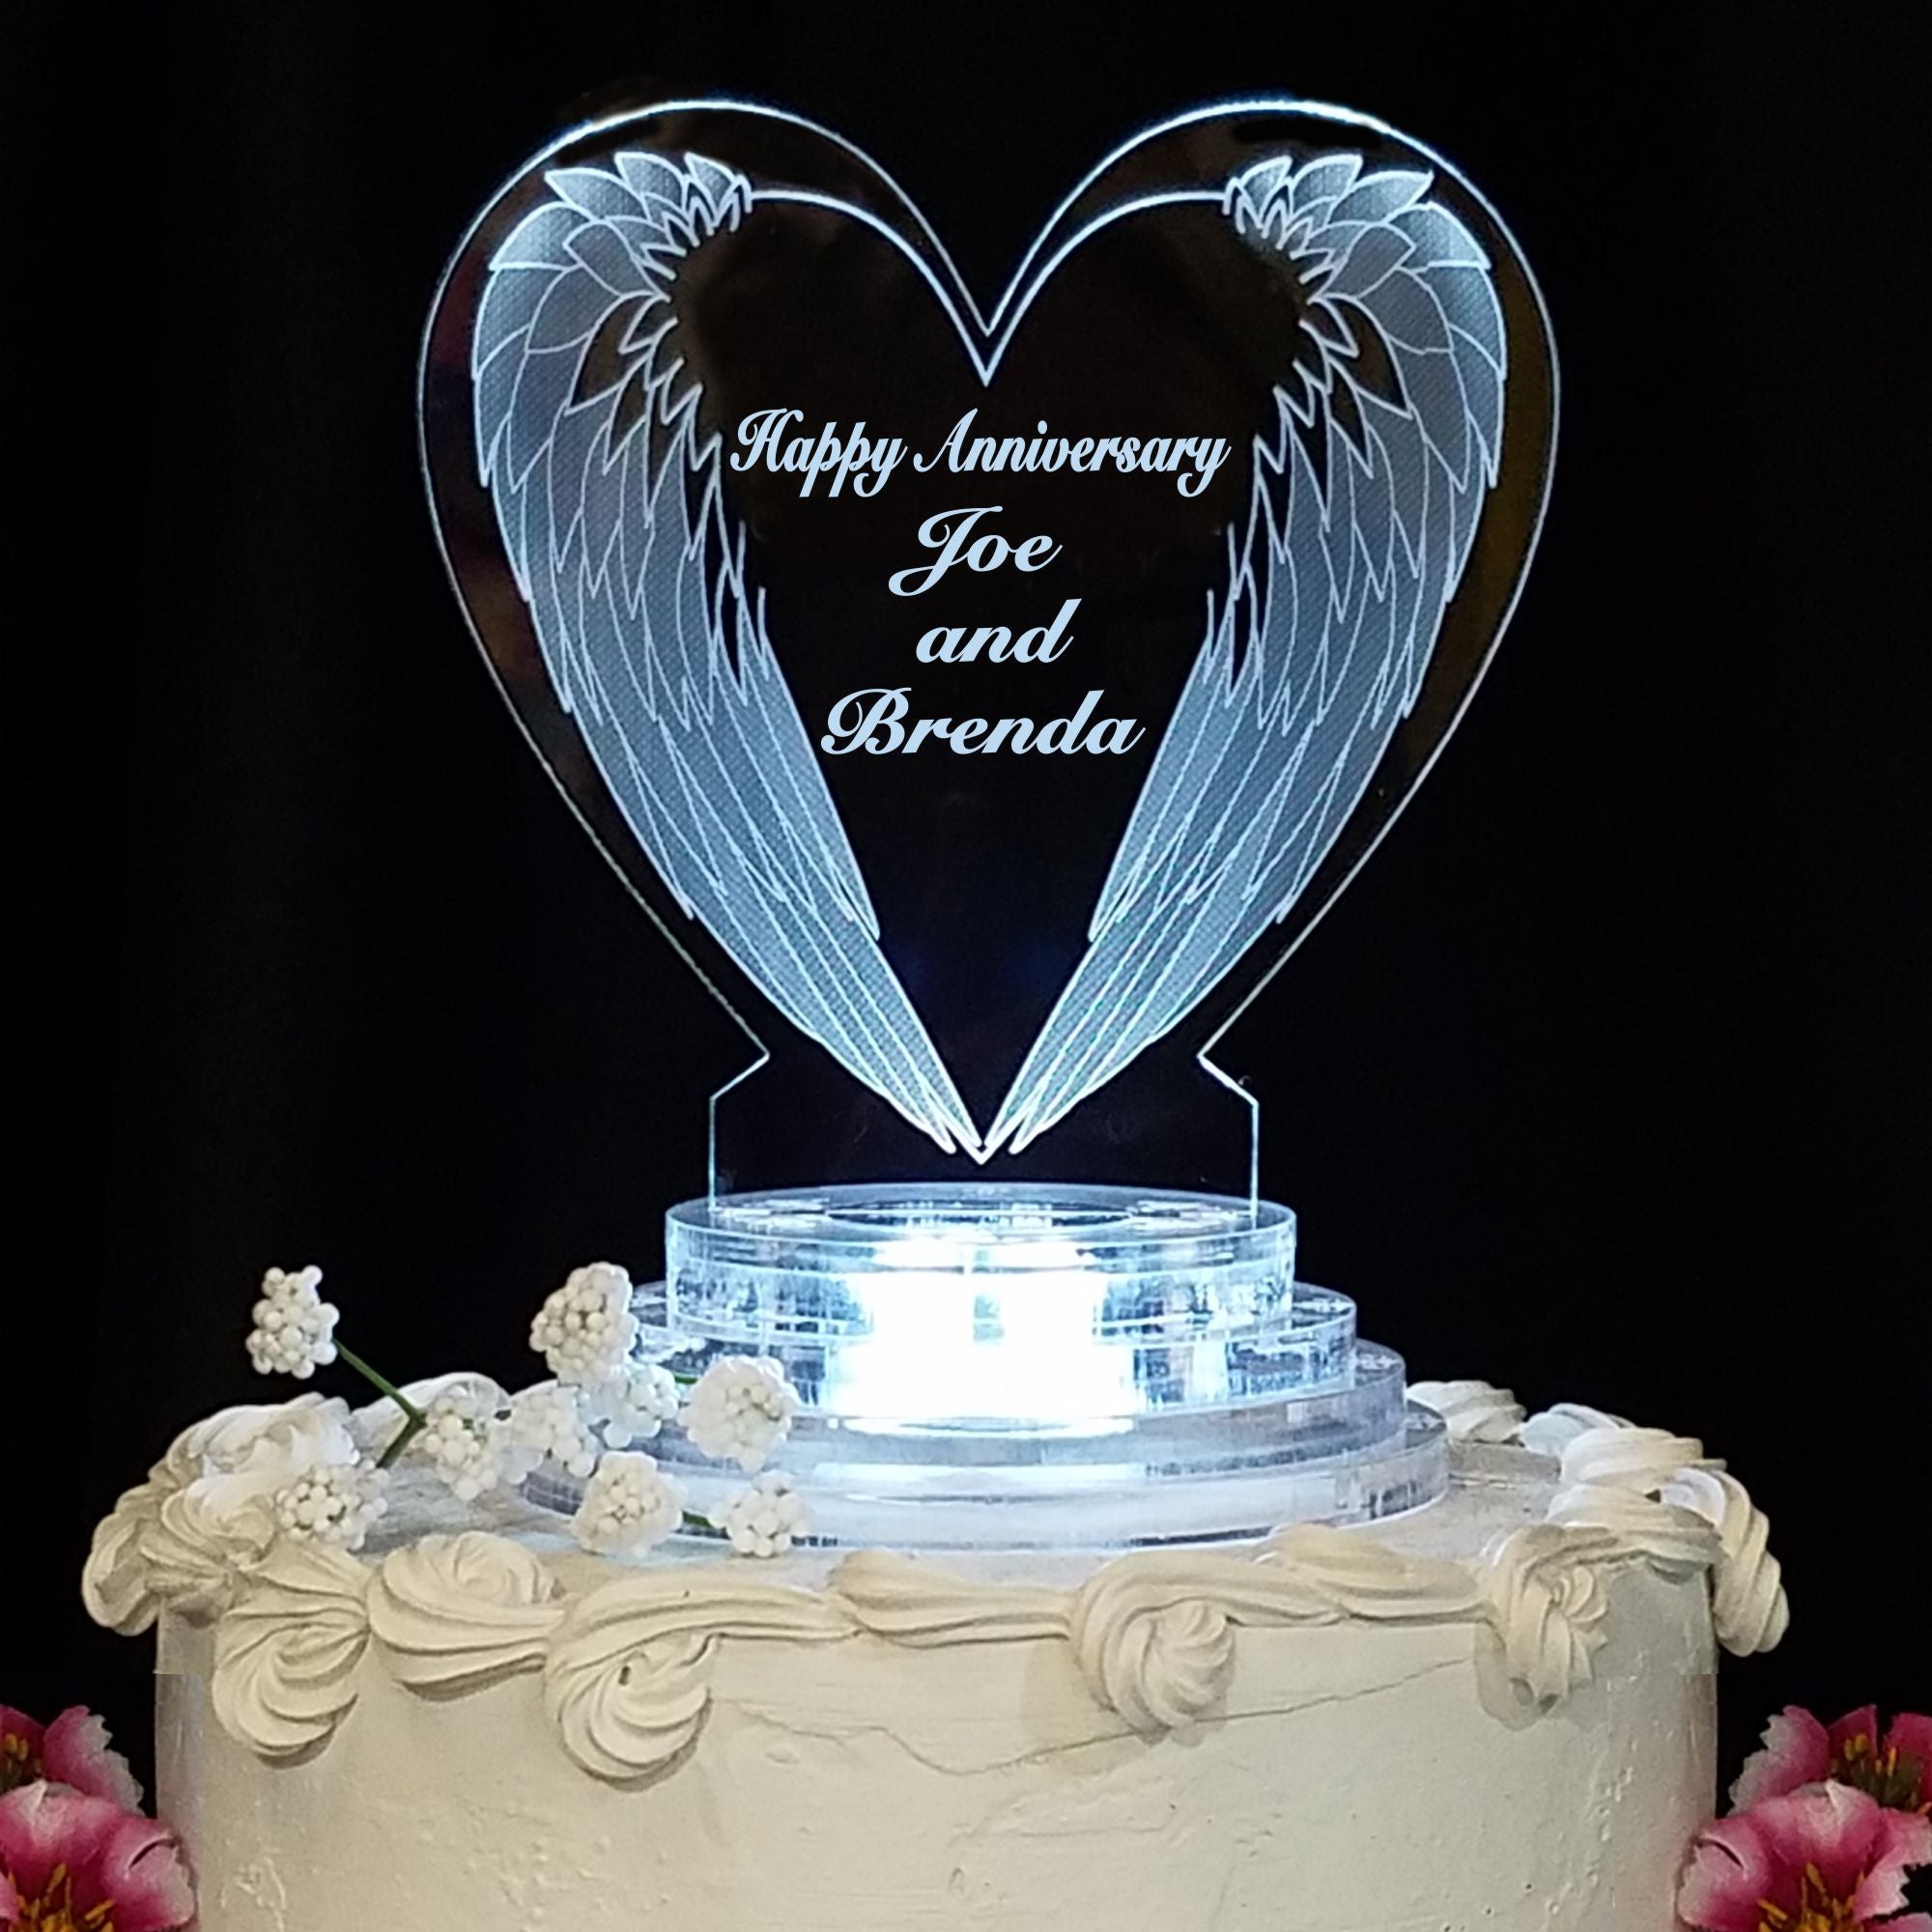 Another wedding cake made with beautiful cake spacer filled with LED lights  & Baby's Breath for Karthik & Sandy..! 💚 The theme being O... | Instagram